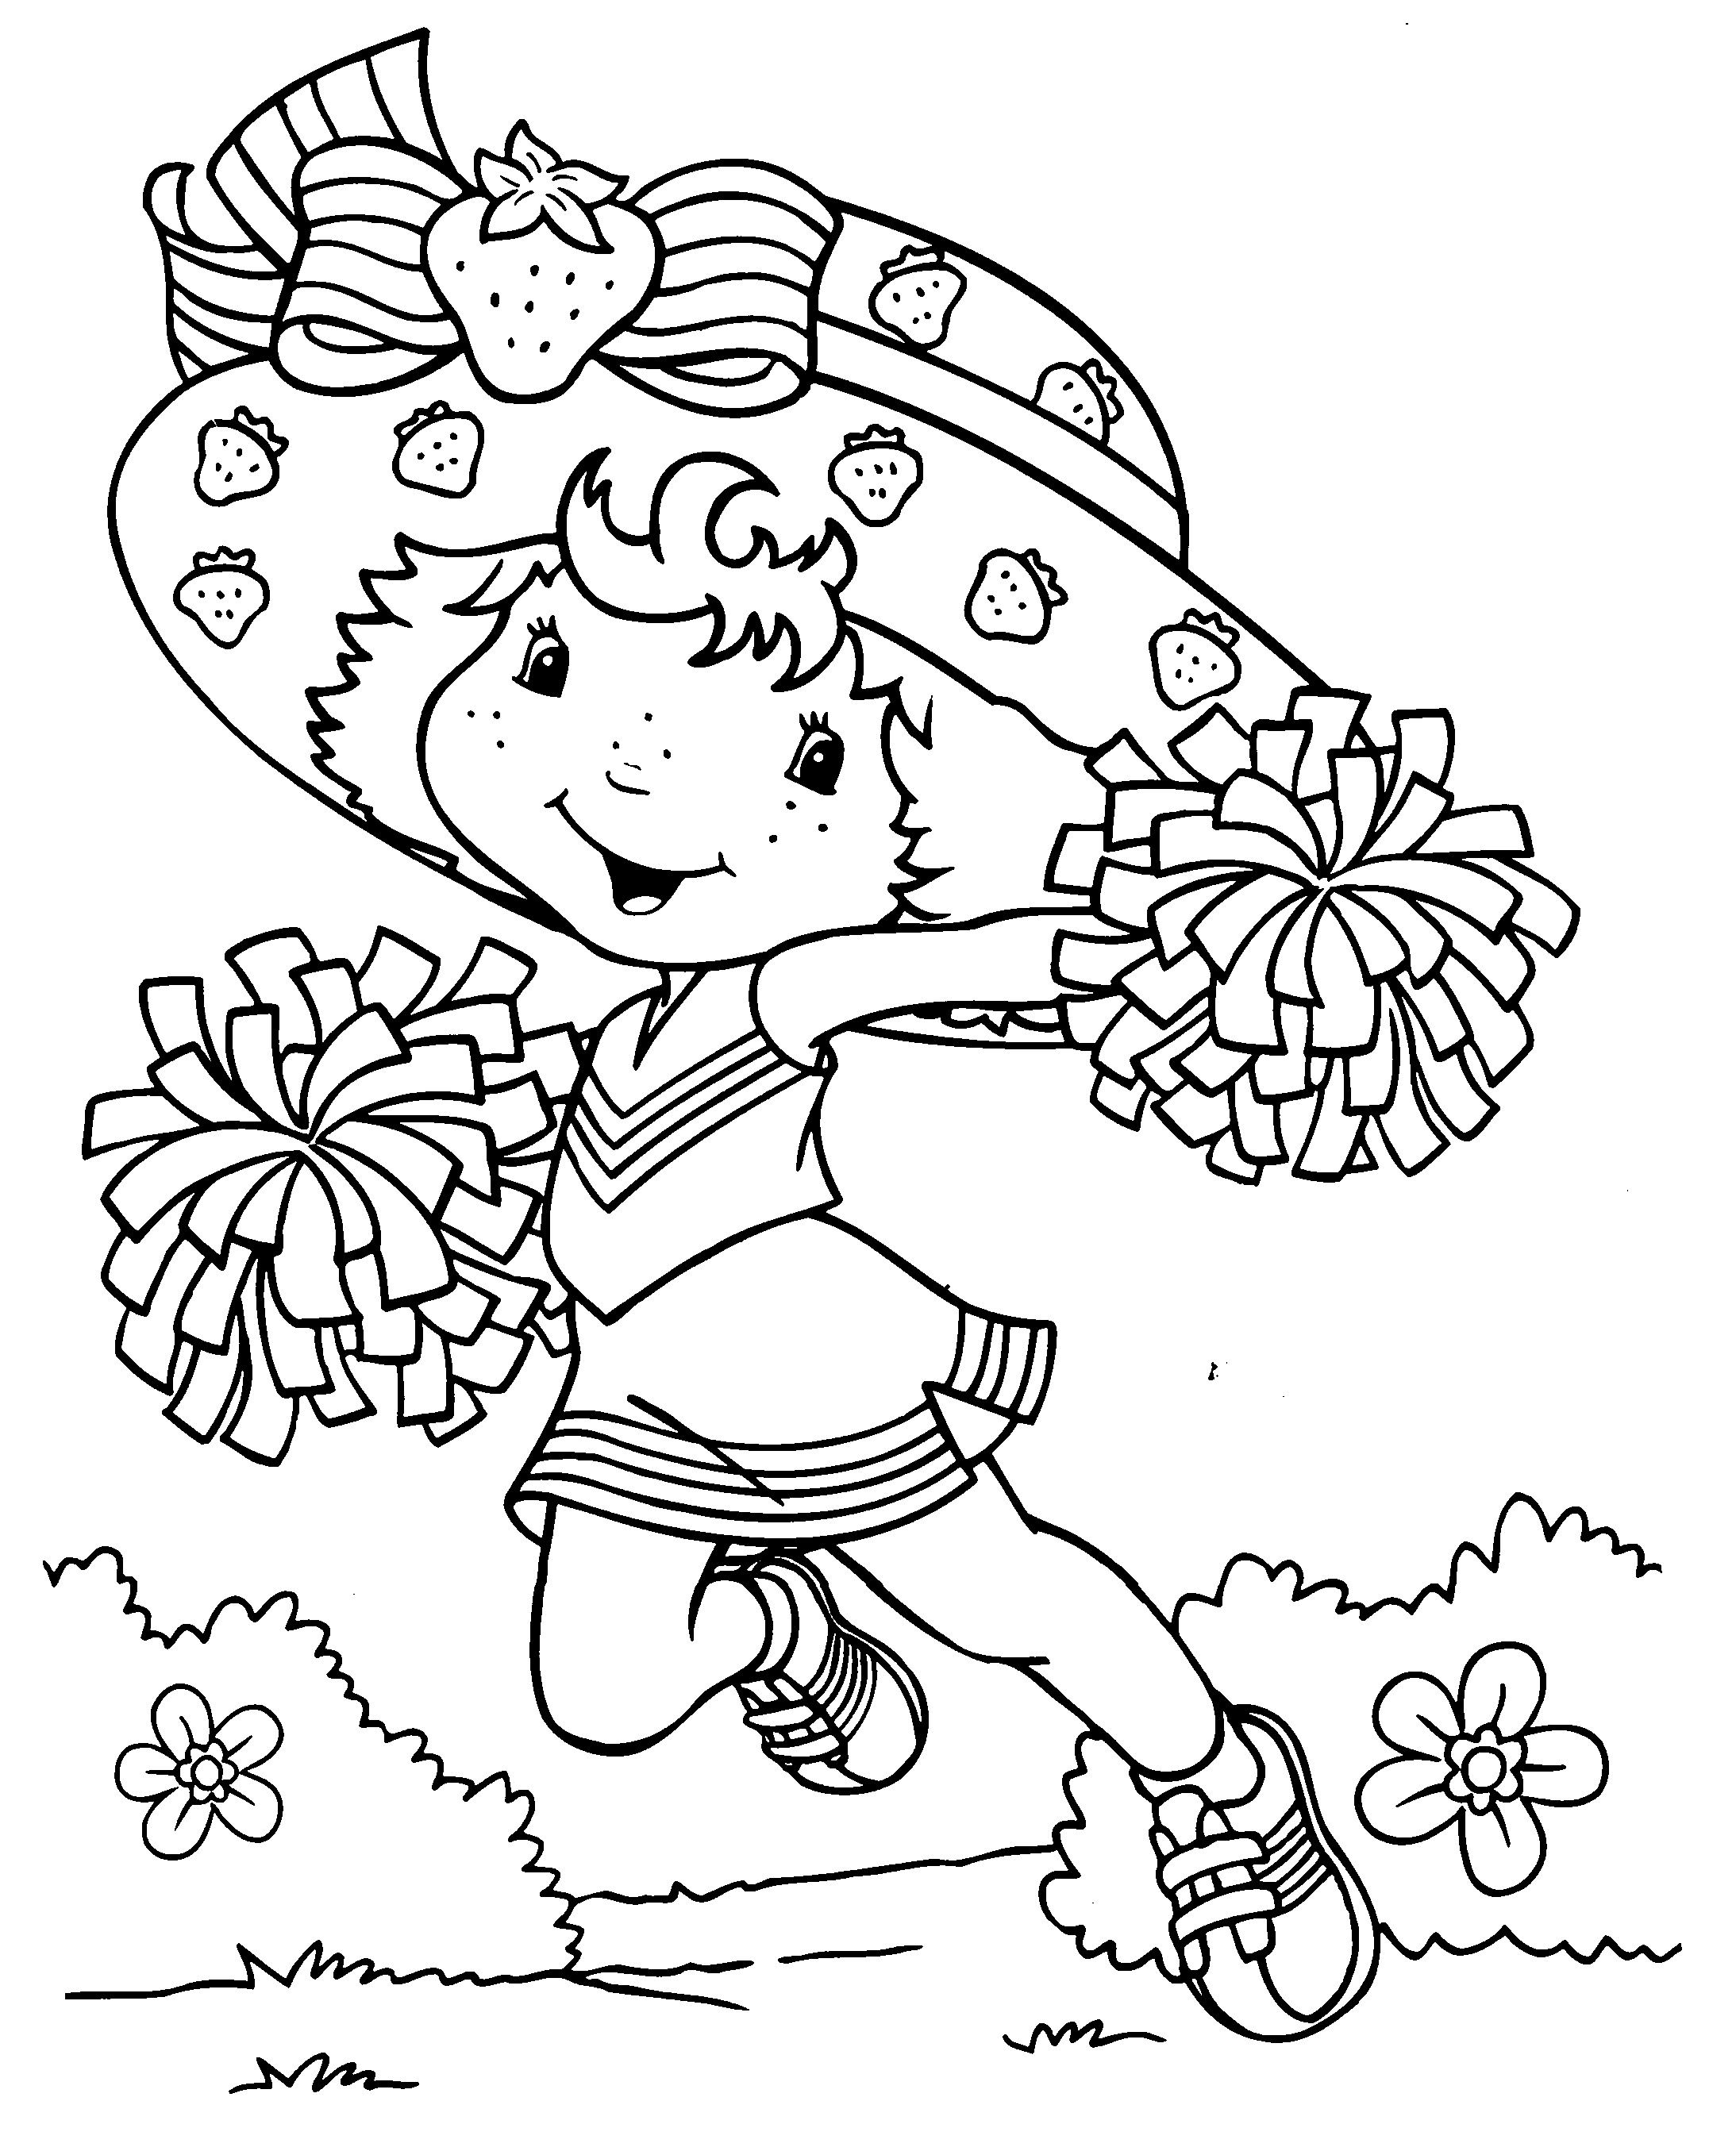 Strawberry Shortcake coloring pages to download Strawberry Shortcake